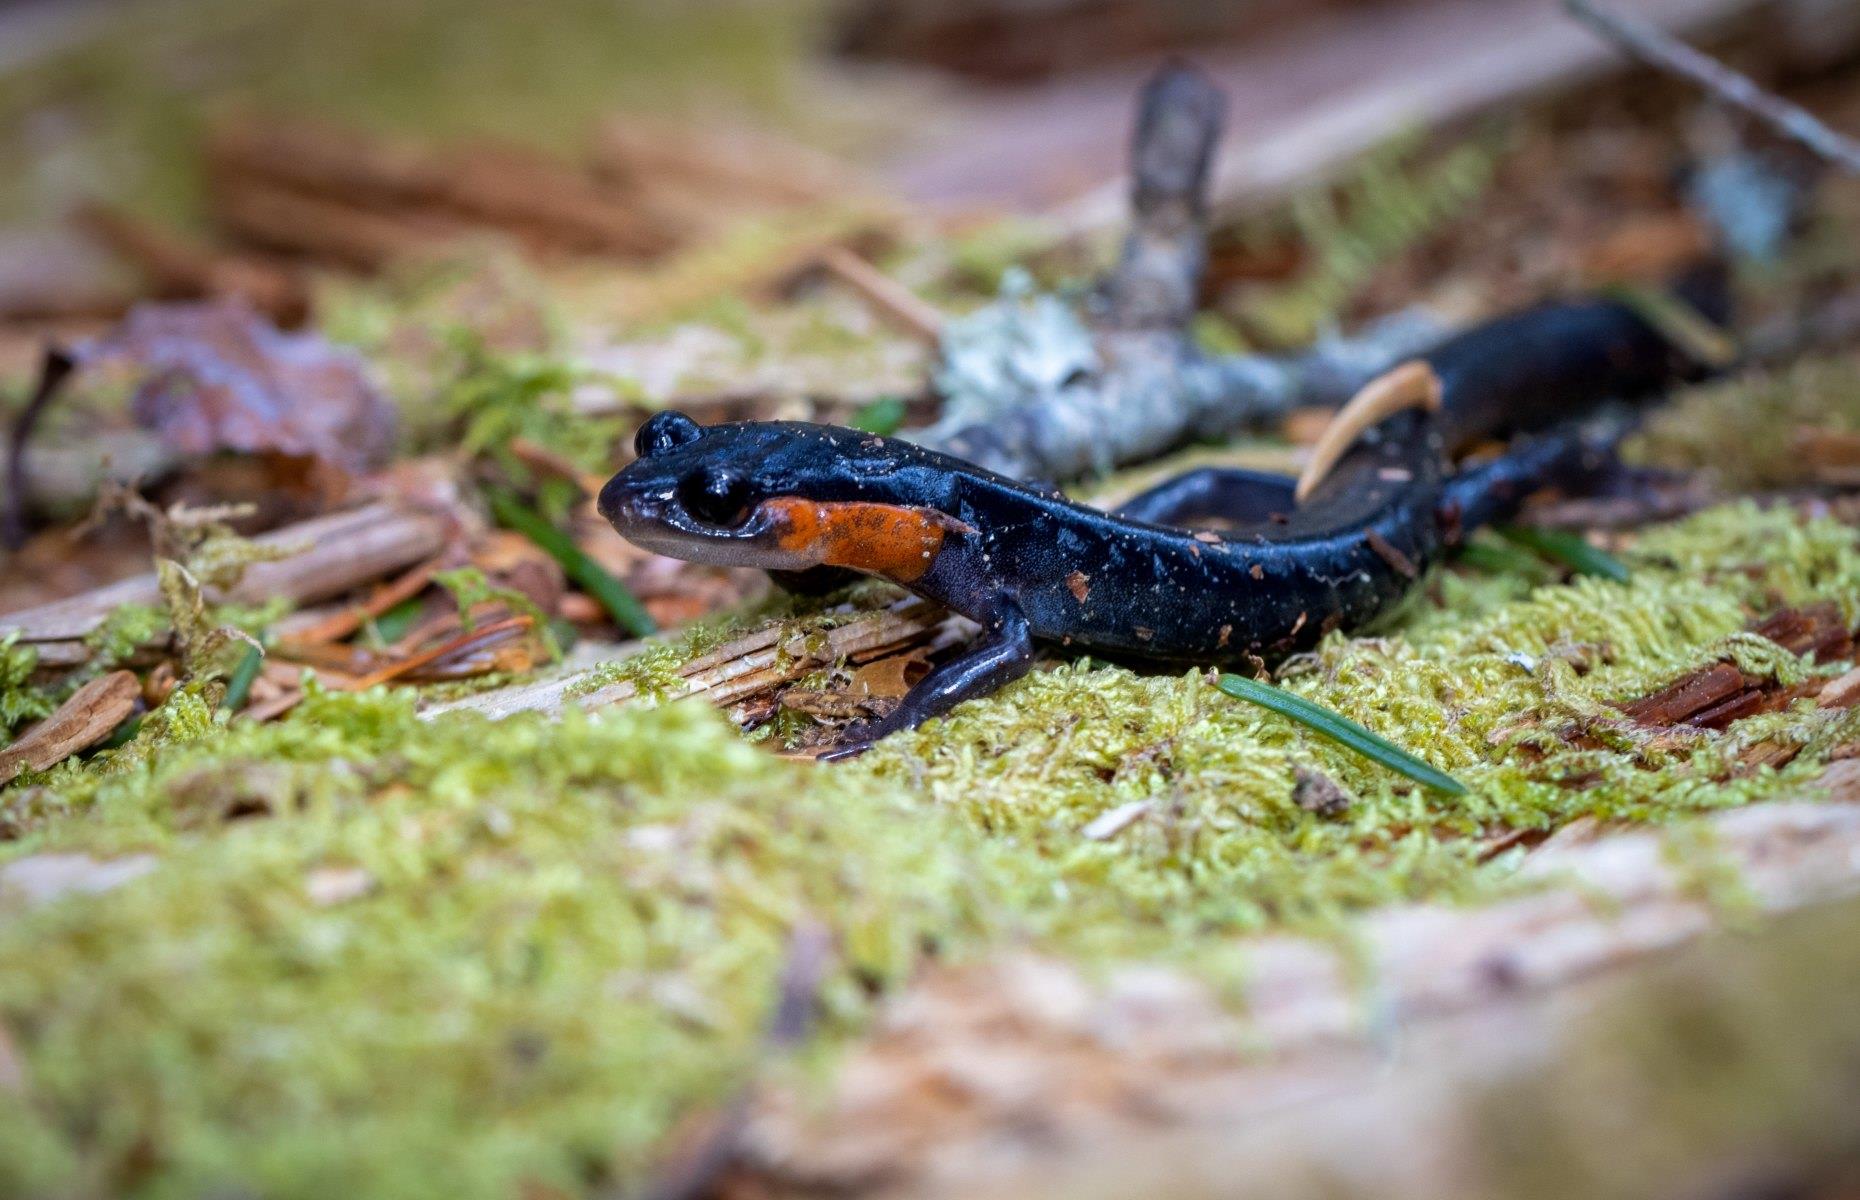 <p>According to UNESCO, the Great Smoky Mountains possess what is probably the greatest variety of salamanders in the world. Thirty-one different species dwell here, which is deemed to be a strong indicator of how healthy the wider ecosystem is. Other notable animal inhabitants of the Smokies include black bears, white-tailed deer, and elk, which were reintroduced in 2001 and are best spotted in the Cataloochee Valley. More than 240 types of bird and around 50 kinds of fish can also be found here.</p>